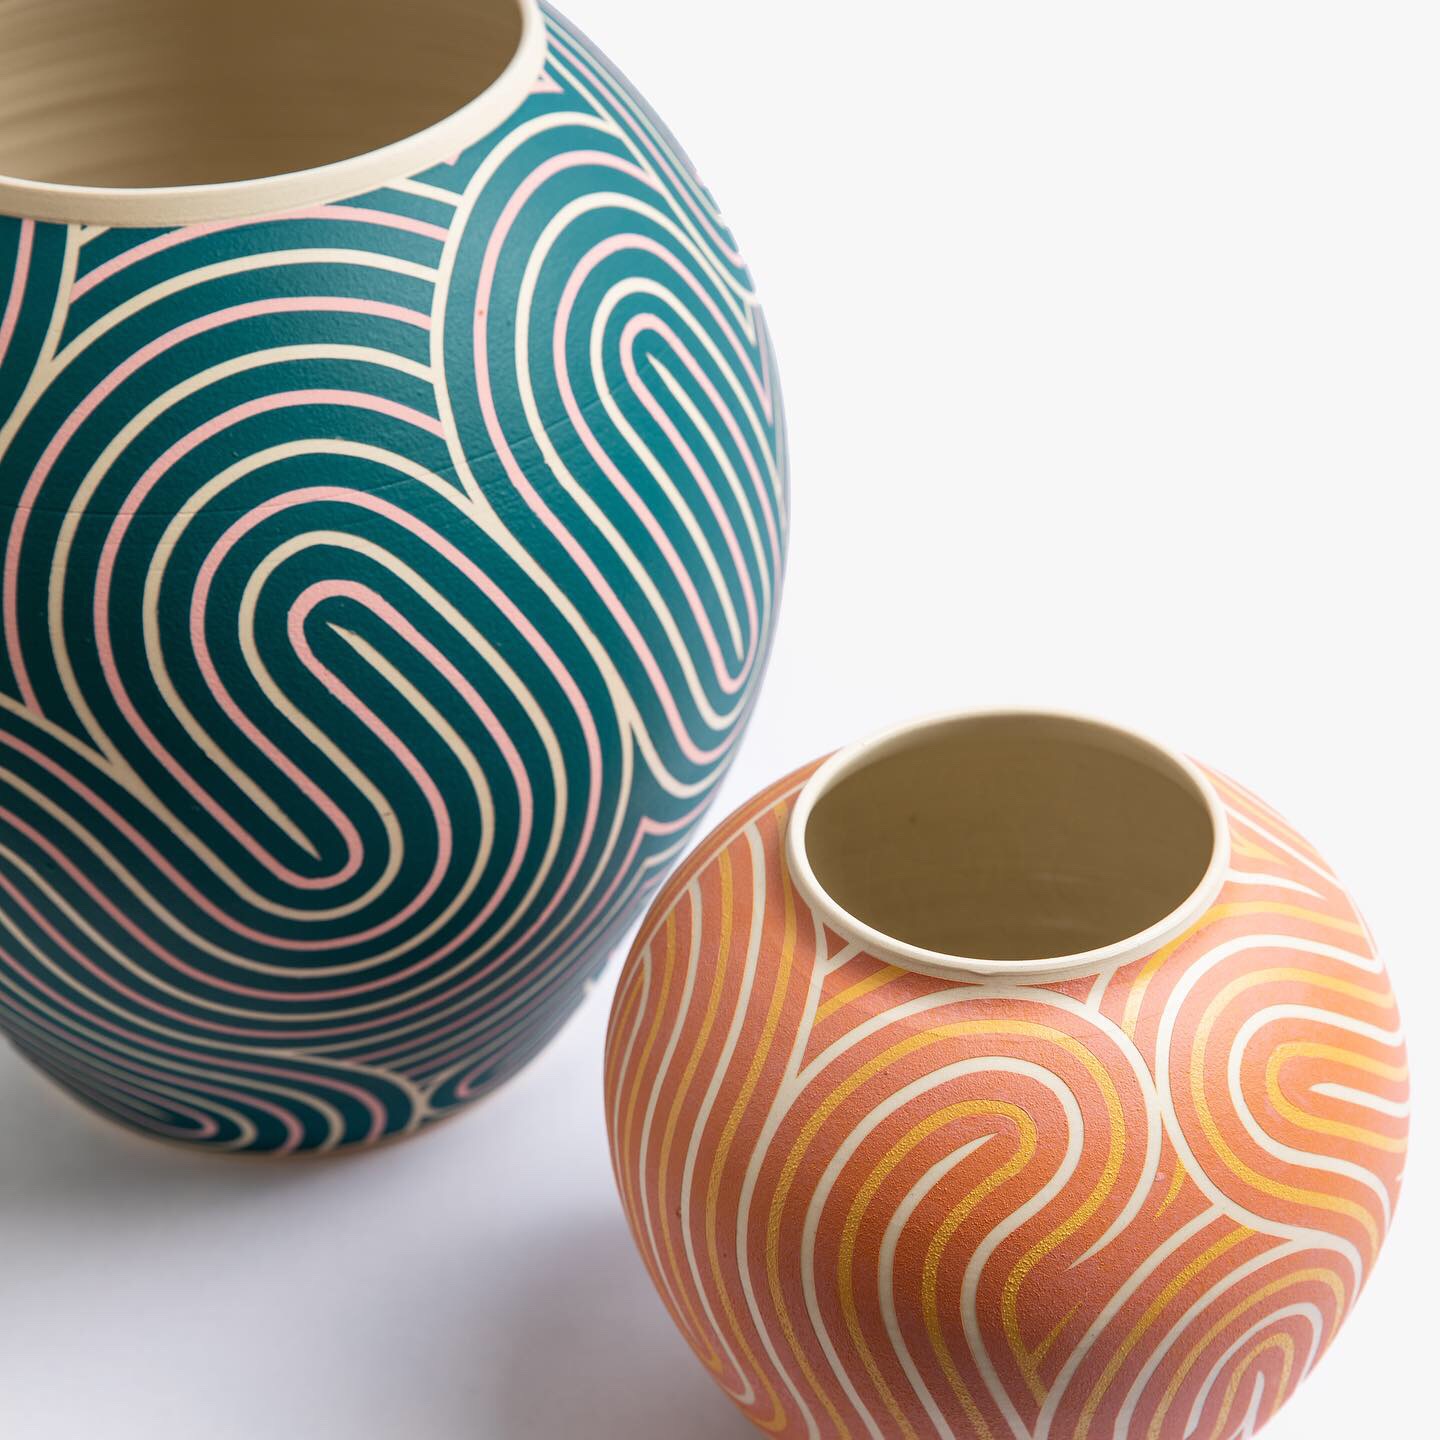 two ceramic vessels with overlapping maze-like pattern, one blue and one orange